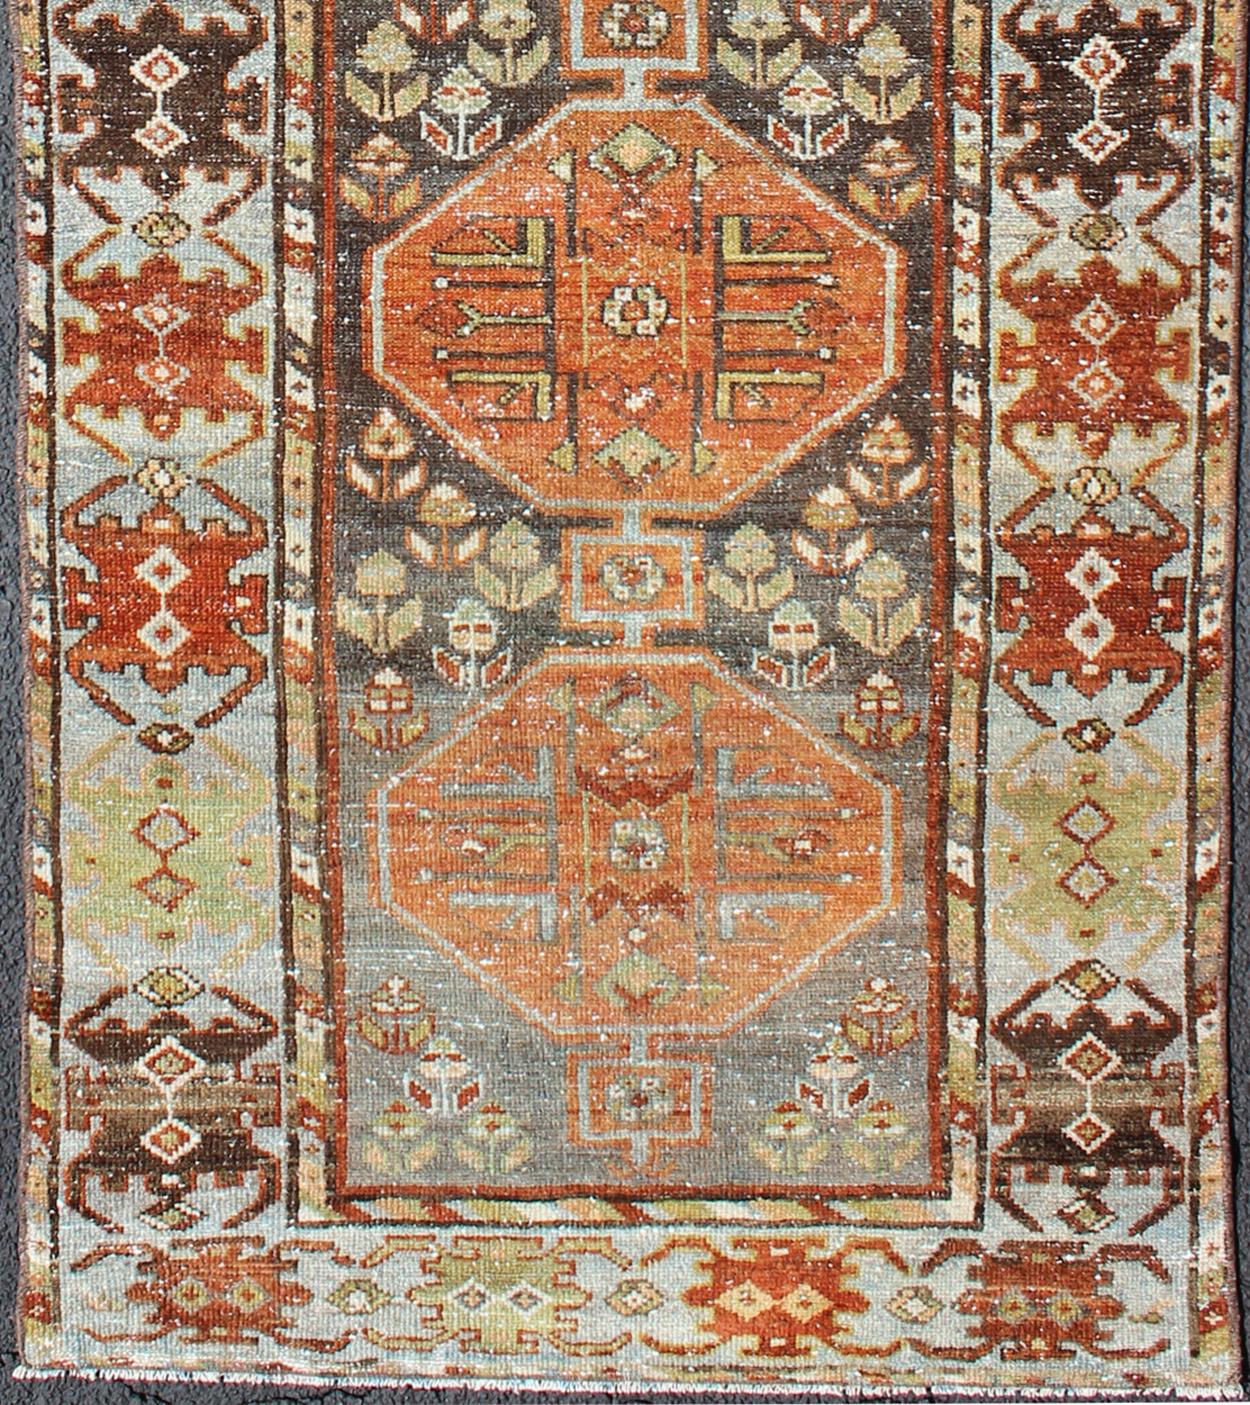 Bakhtiari antique runner from Persia with five geometric medallions in light blue, olive, orange, brown, and red, rug ema-7525, country of origin / type: Iran / Bakhtiari, circa 1910s.

This antique Persian Bakhtiari rug from early 20th century Iran